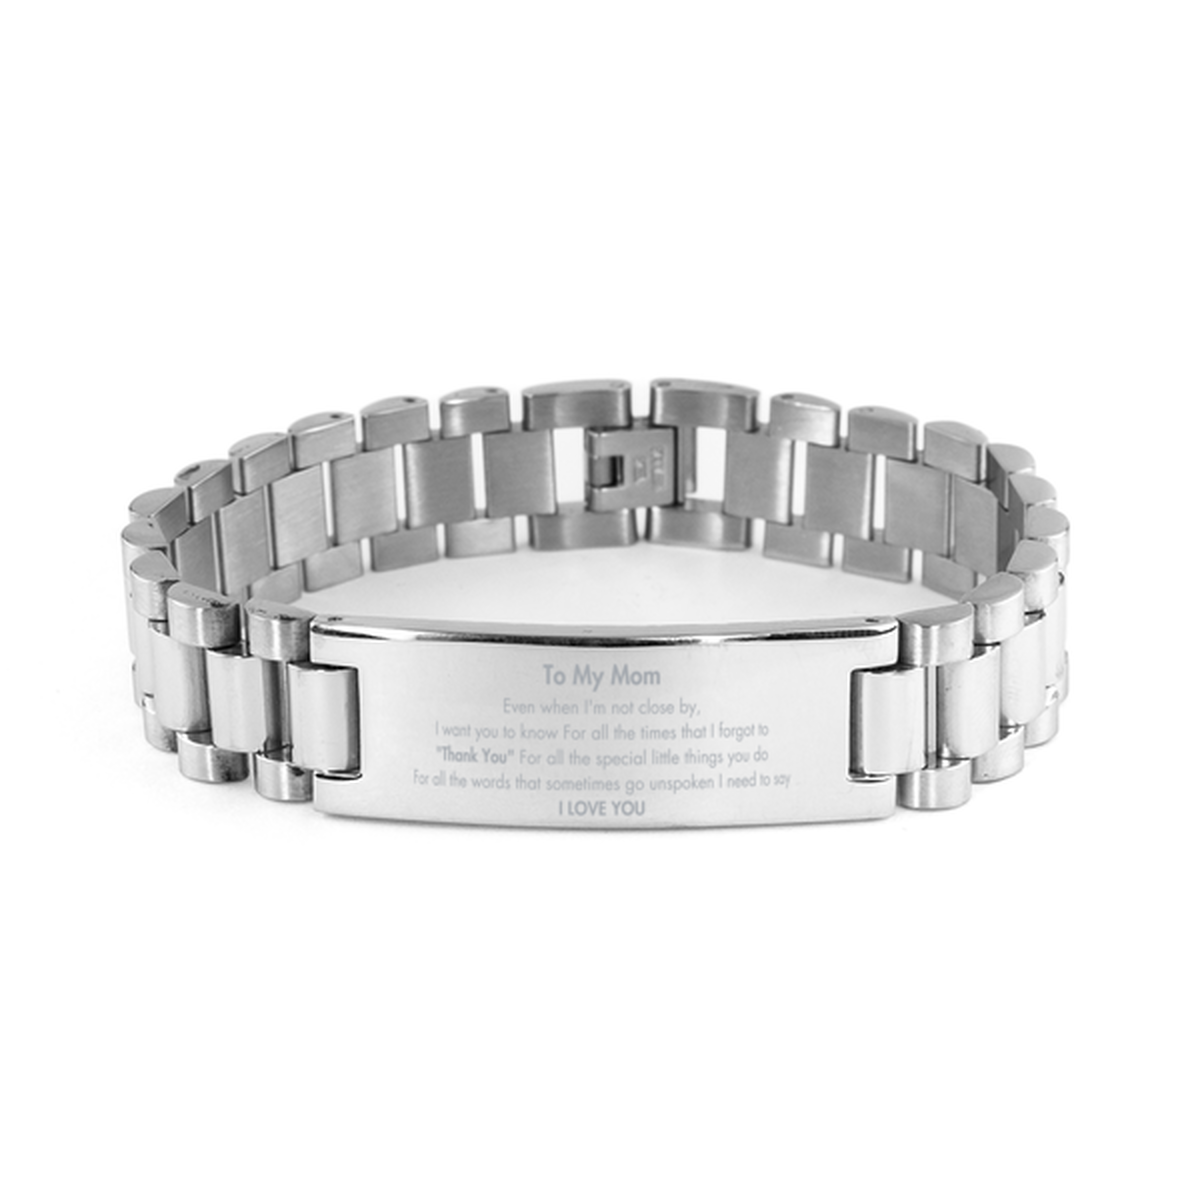 Thank You Gifts for Mom, Keepsake Ladder Stainless Steel Bracelet Gifts for Mom Birthday Mother's day Father's Day Mom For all the words That sometimes go unspoken I need to say I LOVE YOU